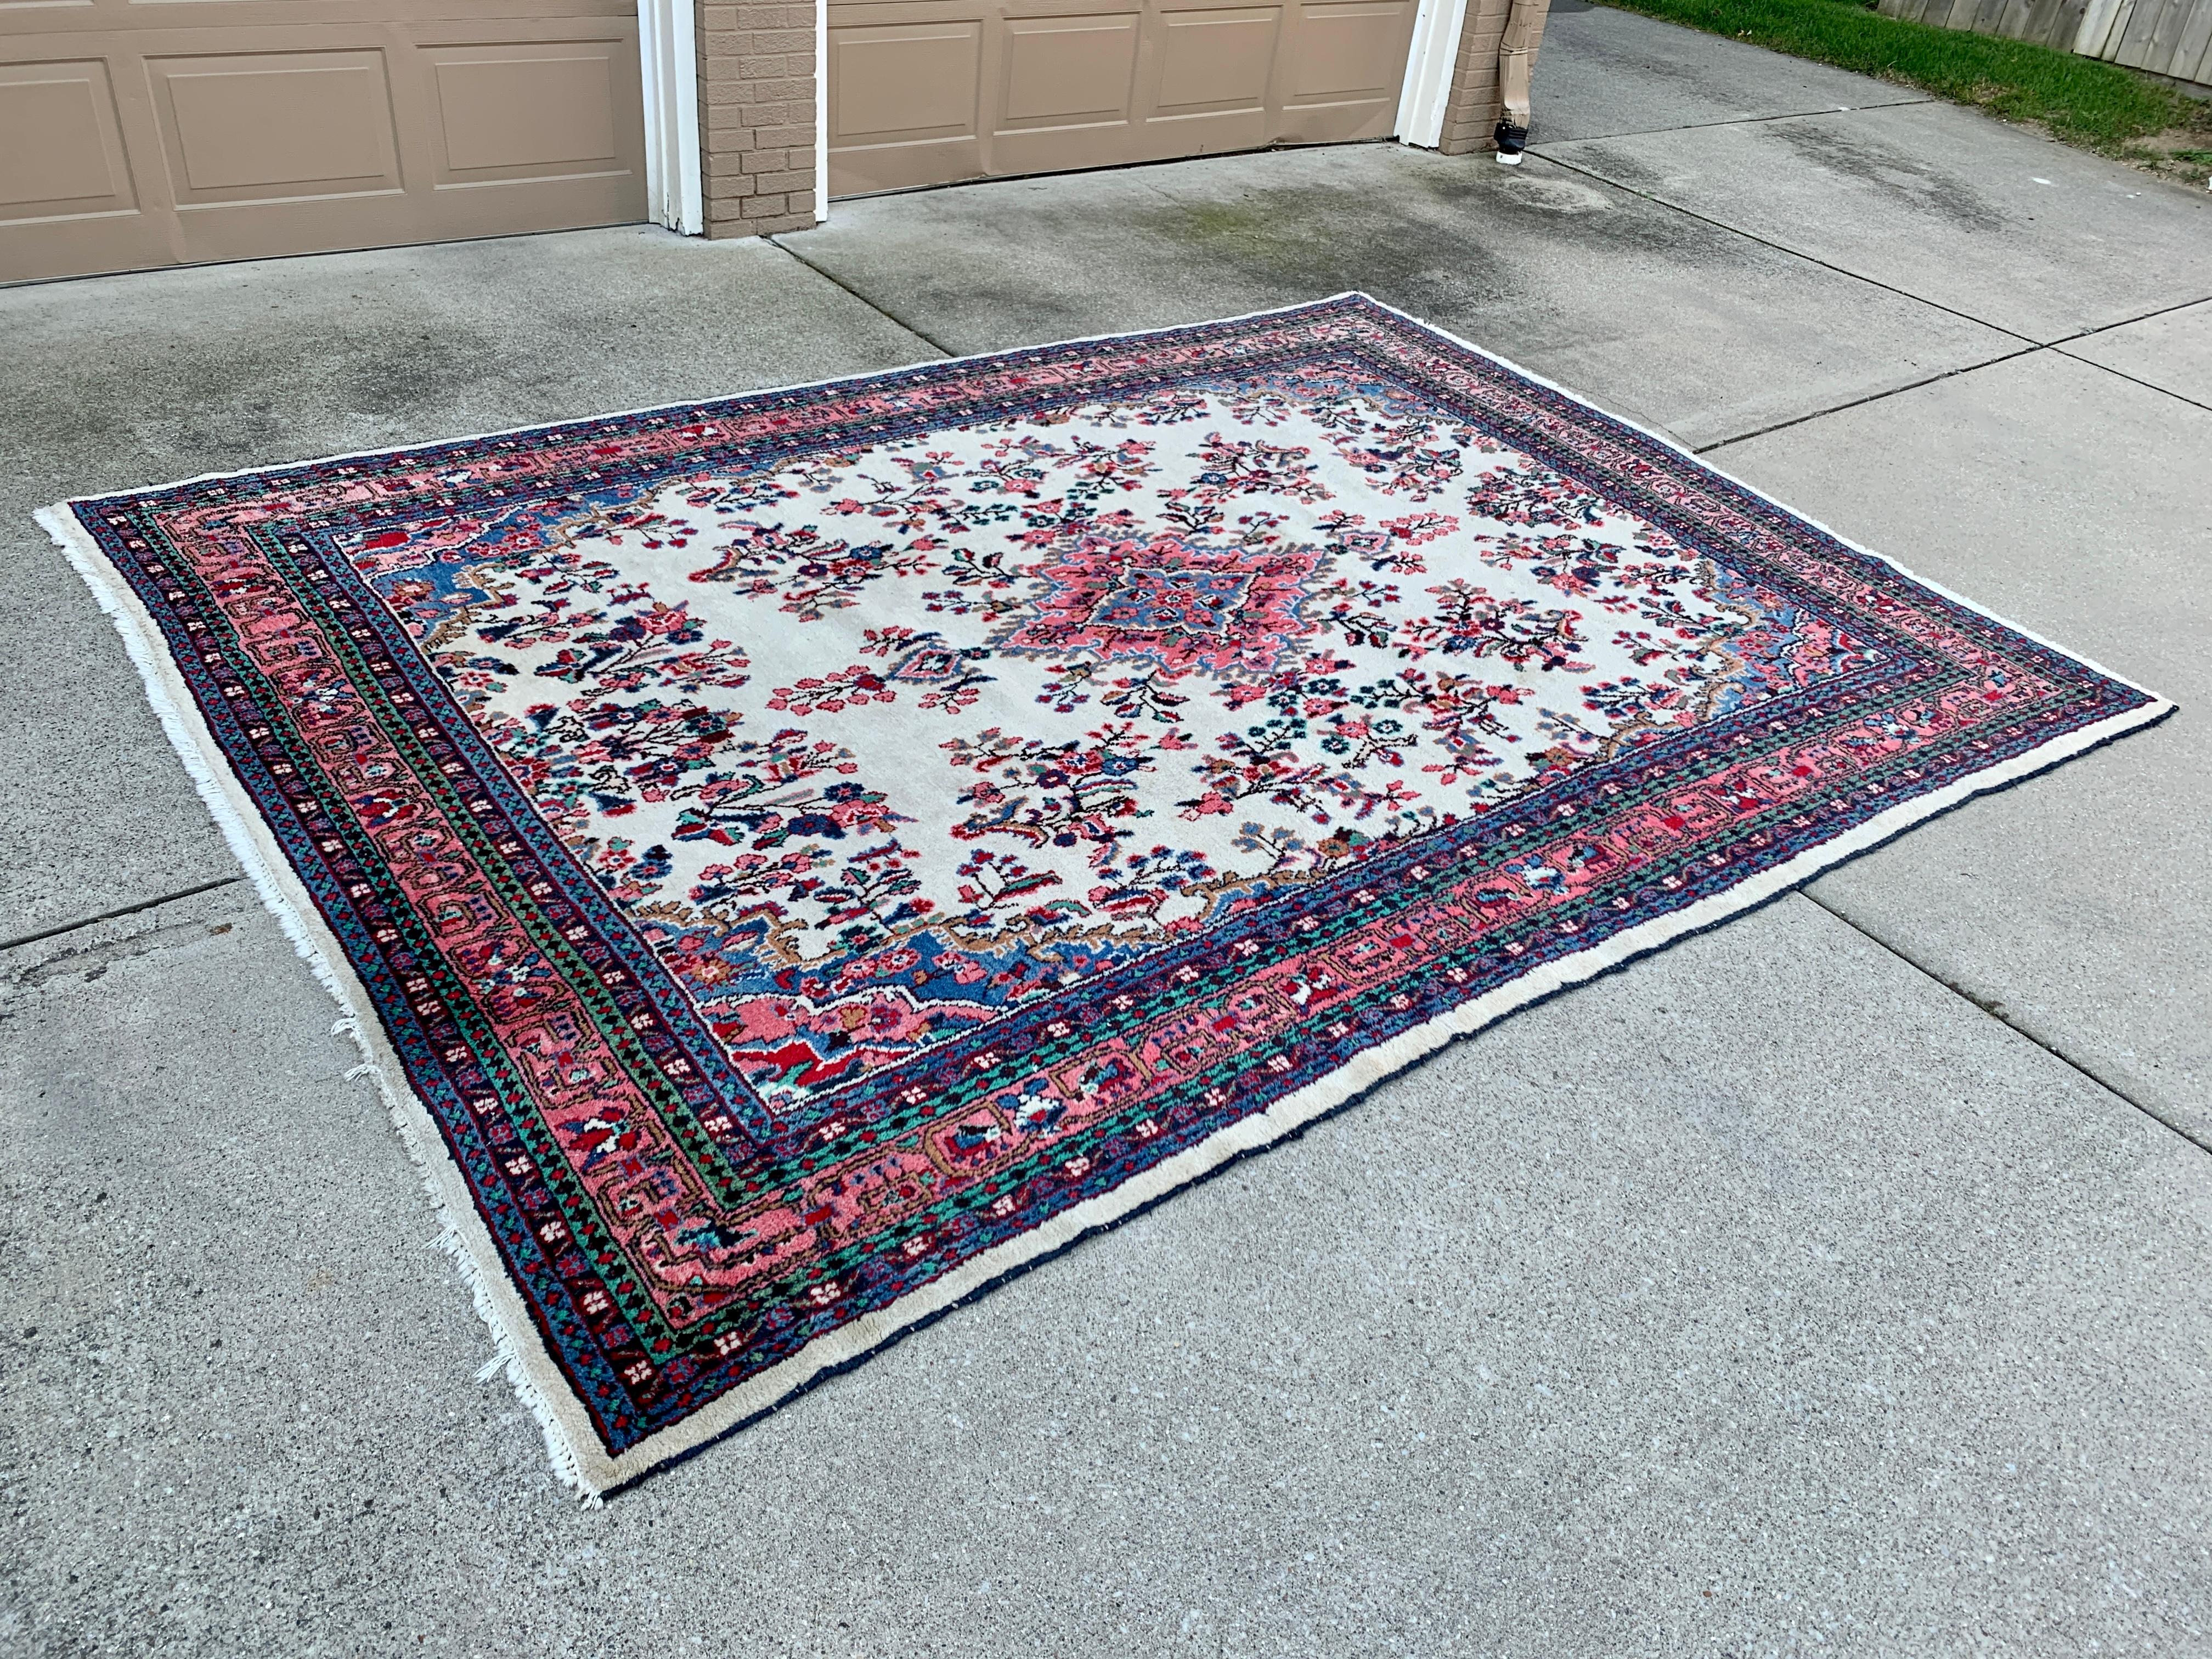 Vintage Hand-Knotted Persian Room Size Wool Rug In Good Condition For Sale In Elkhart, IN